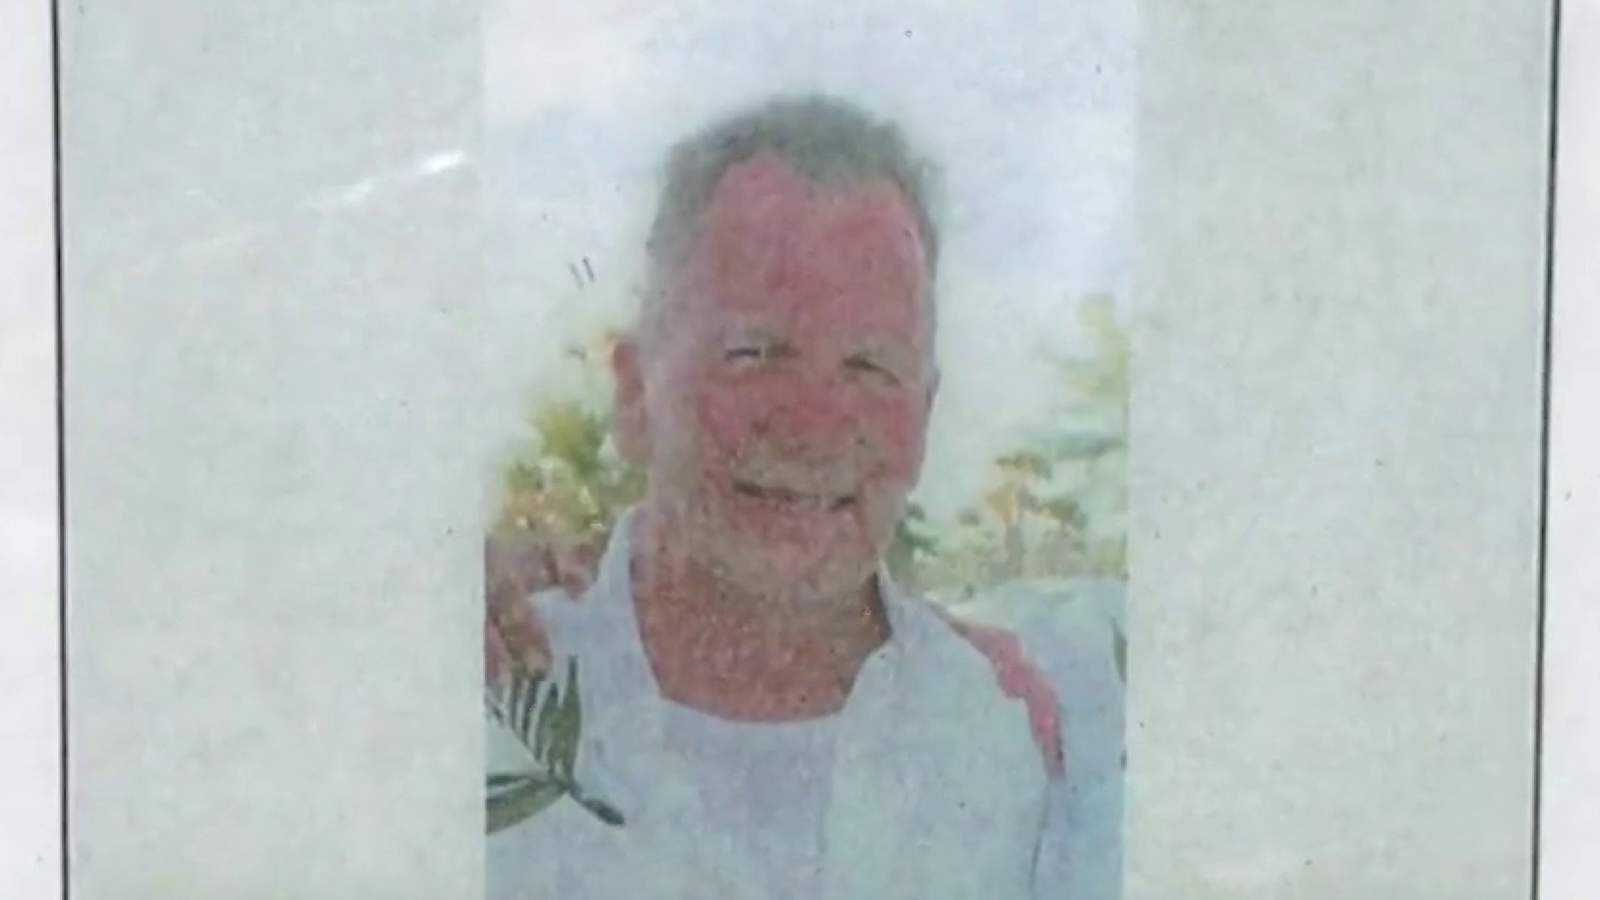 Authorities looking for missing man